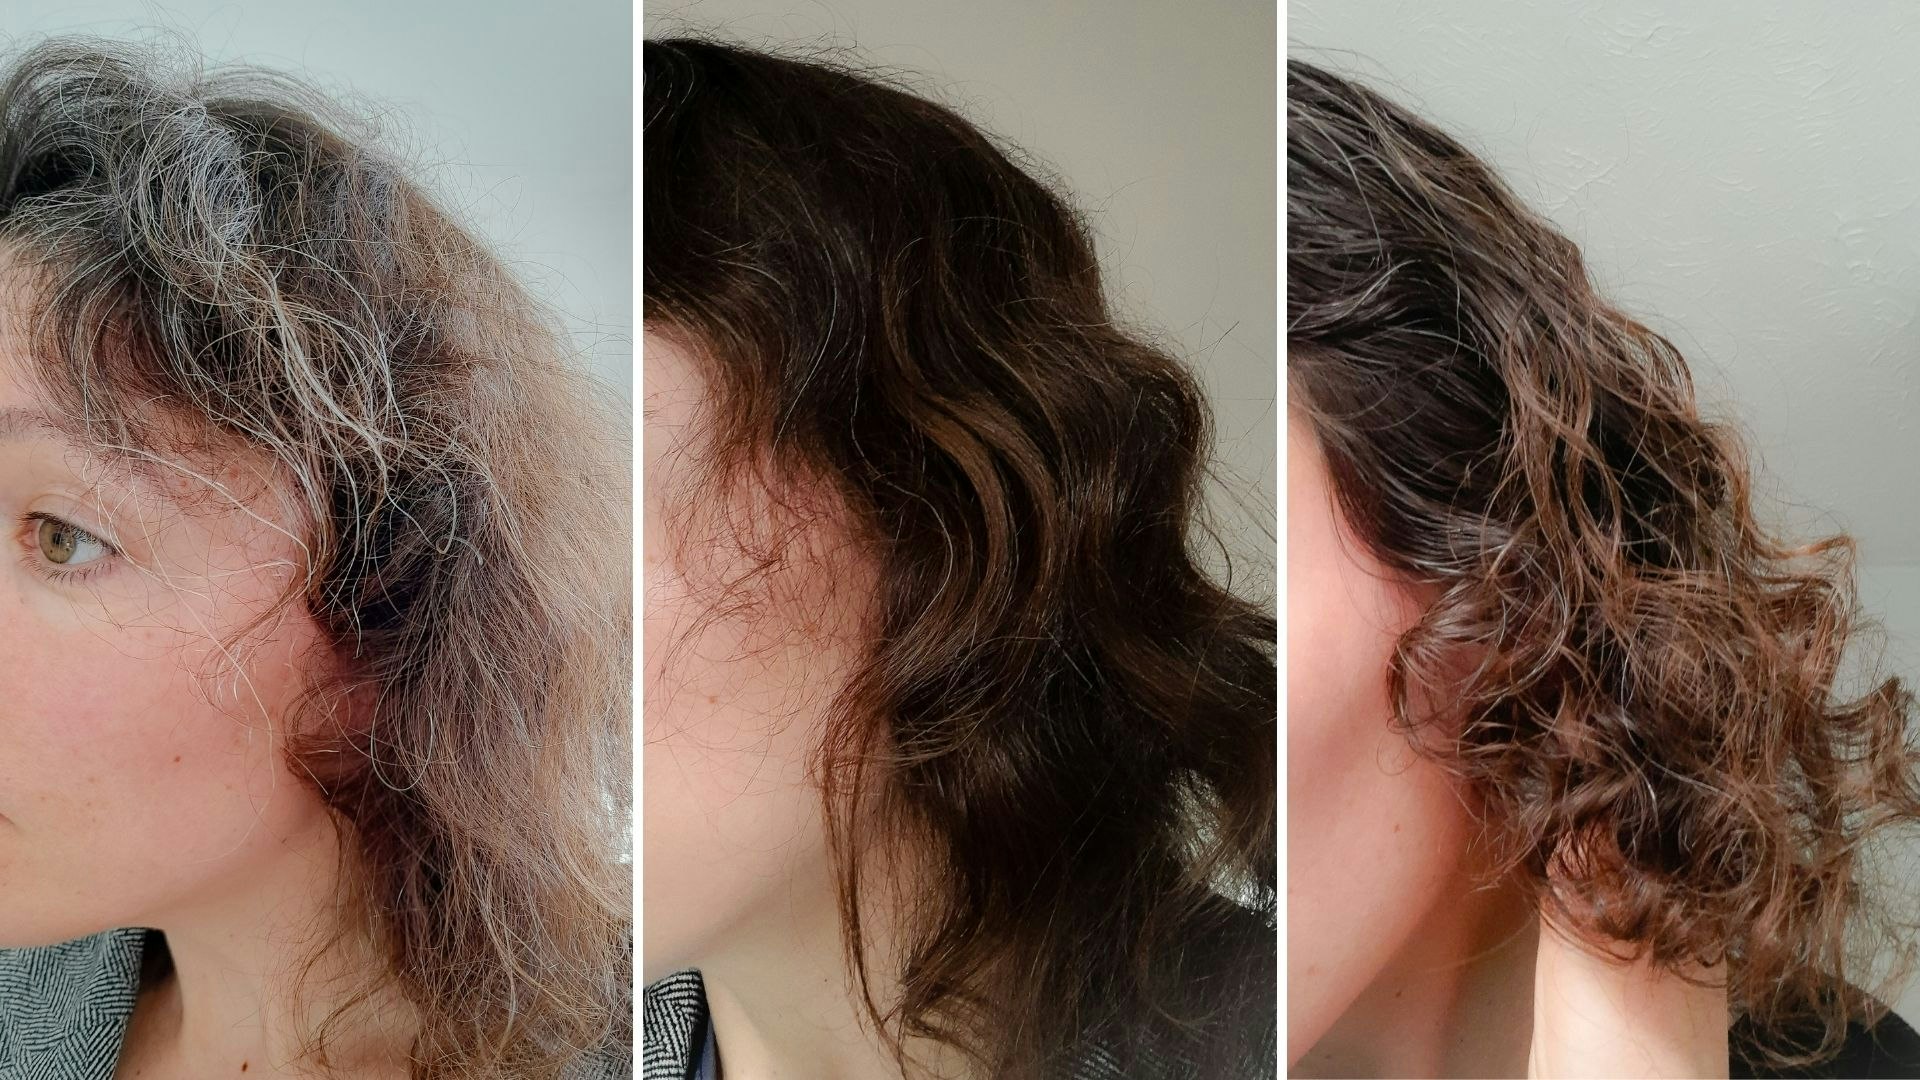 Dry and damaged hair before and after using specialist shampoos.